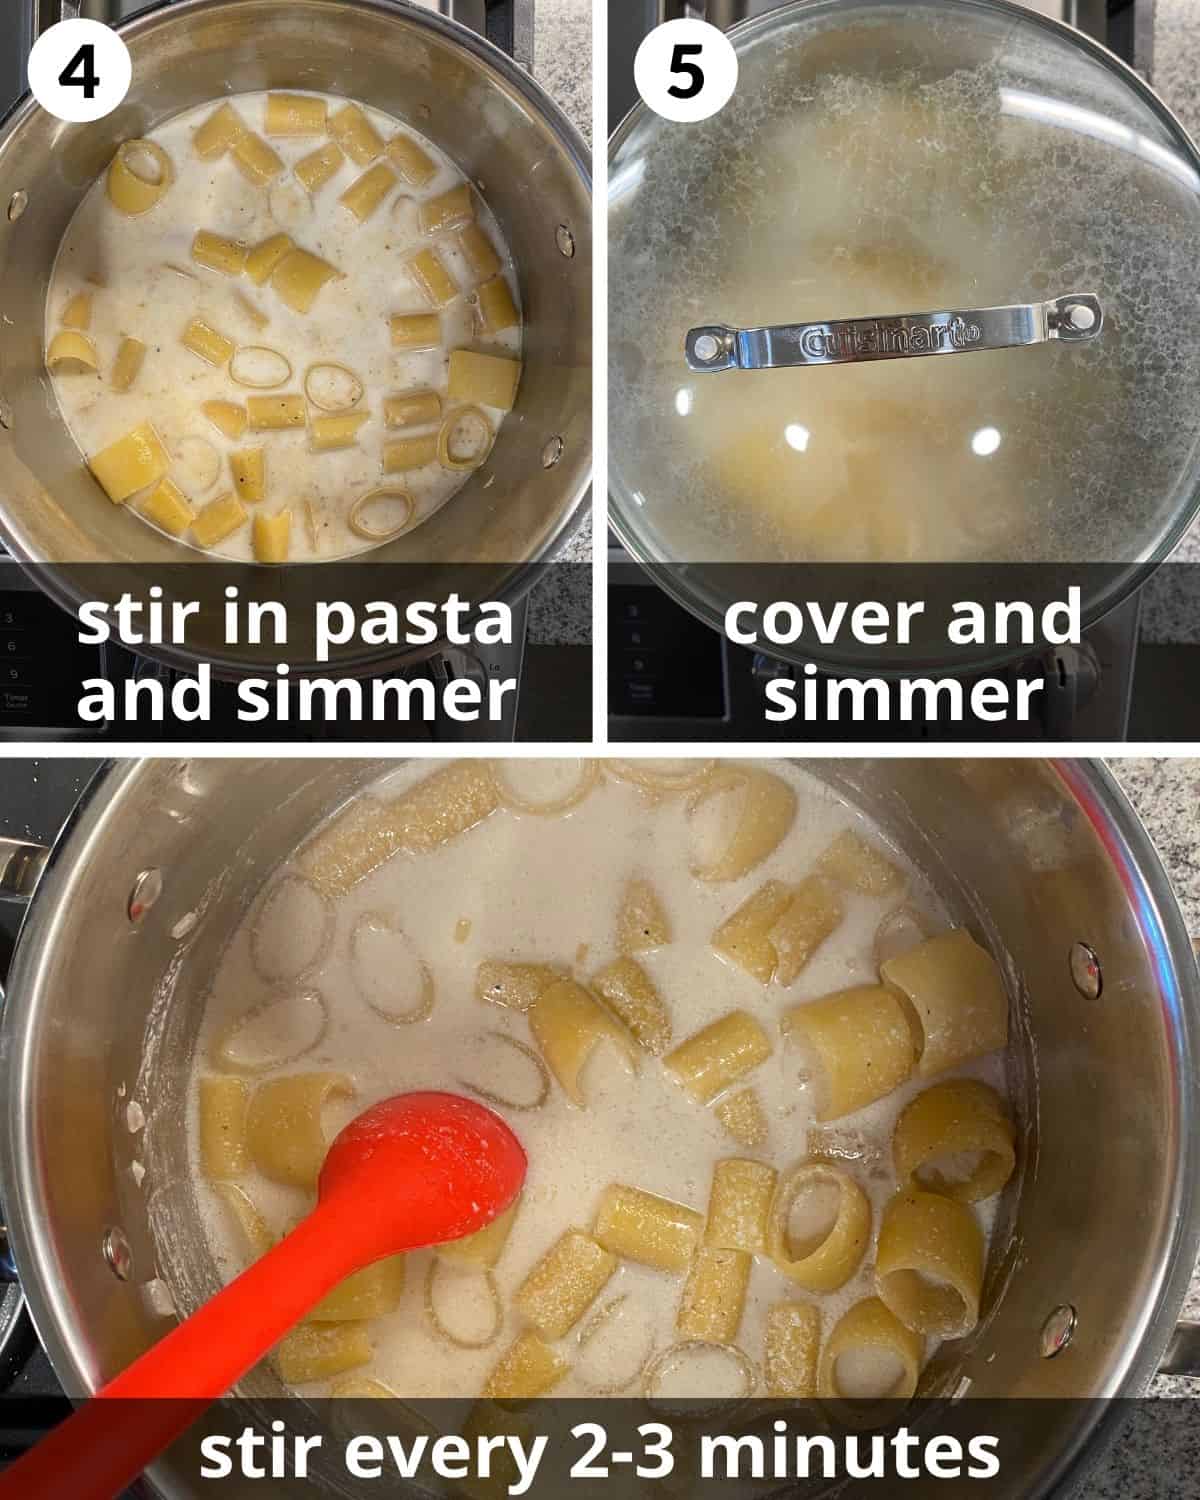 3 photos. Pasta stirred in. Pot covered. Pasta being stirred.